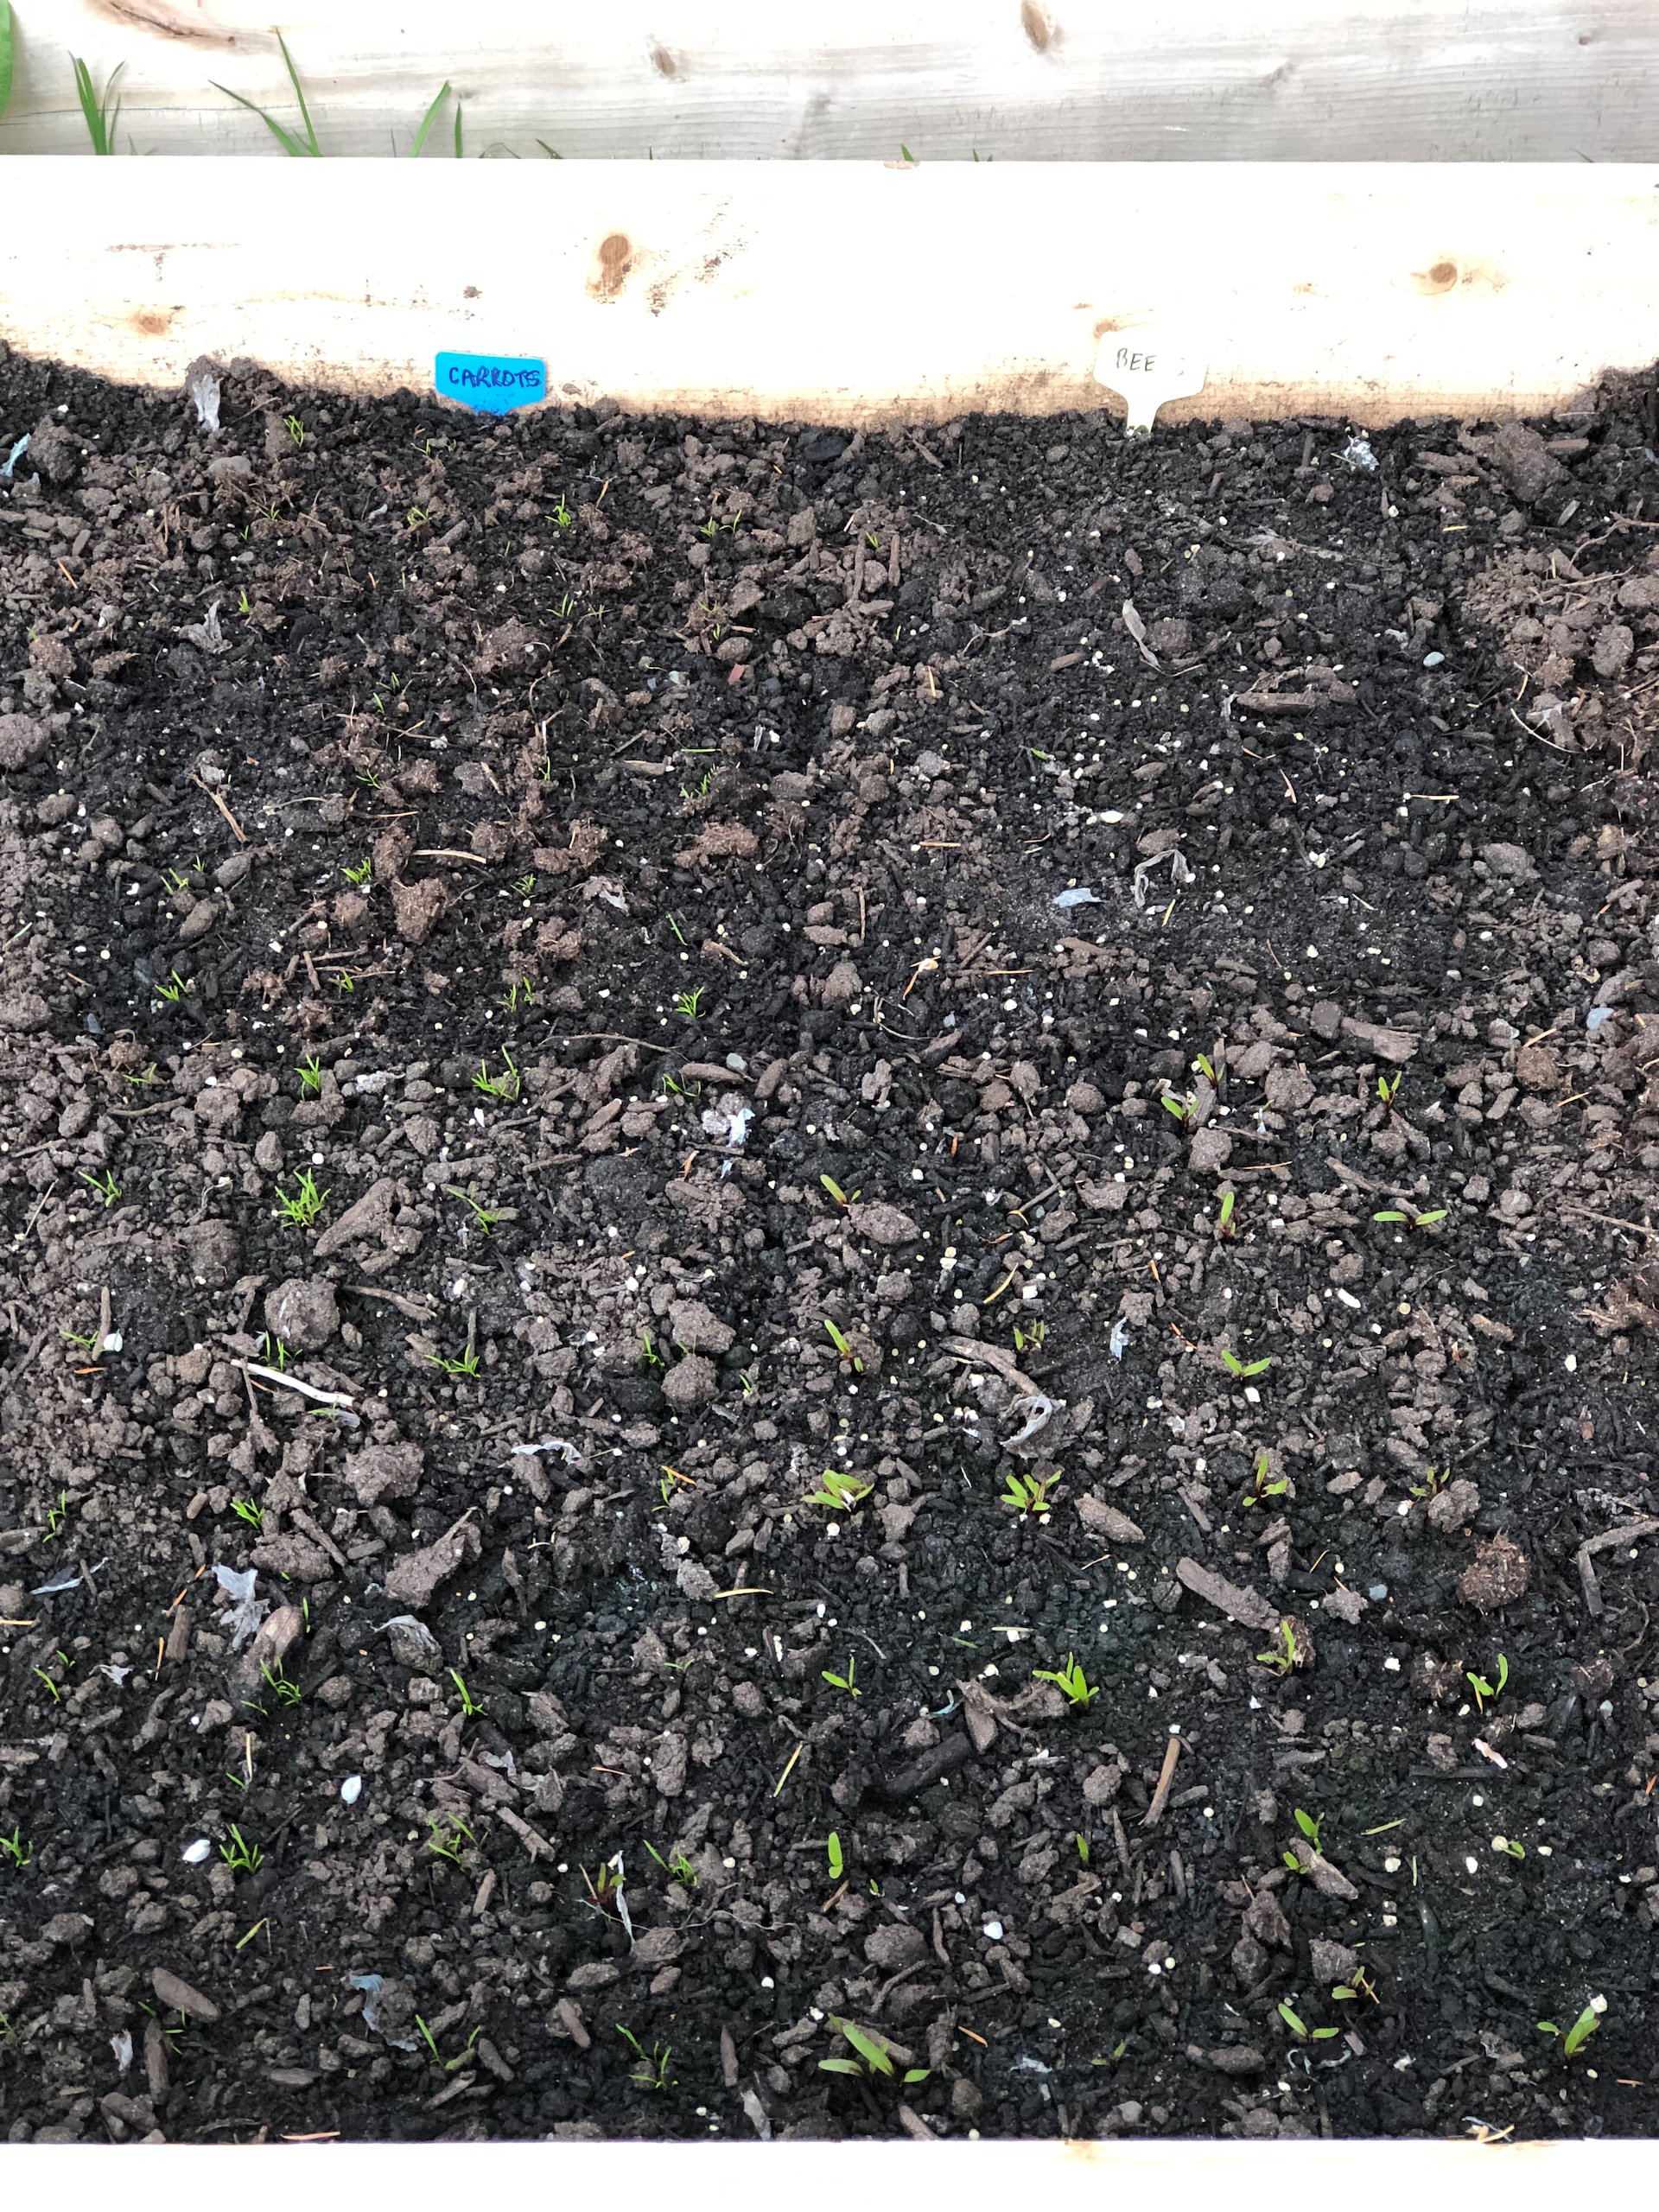  The carrots and beets have started to sprout.  